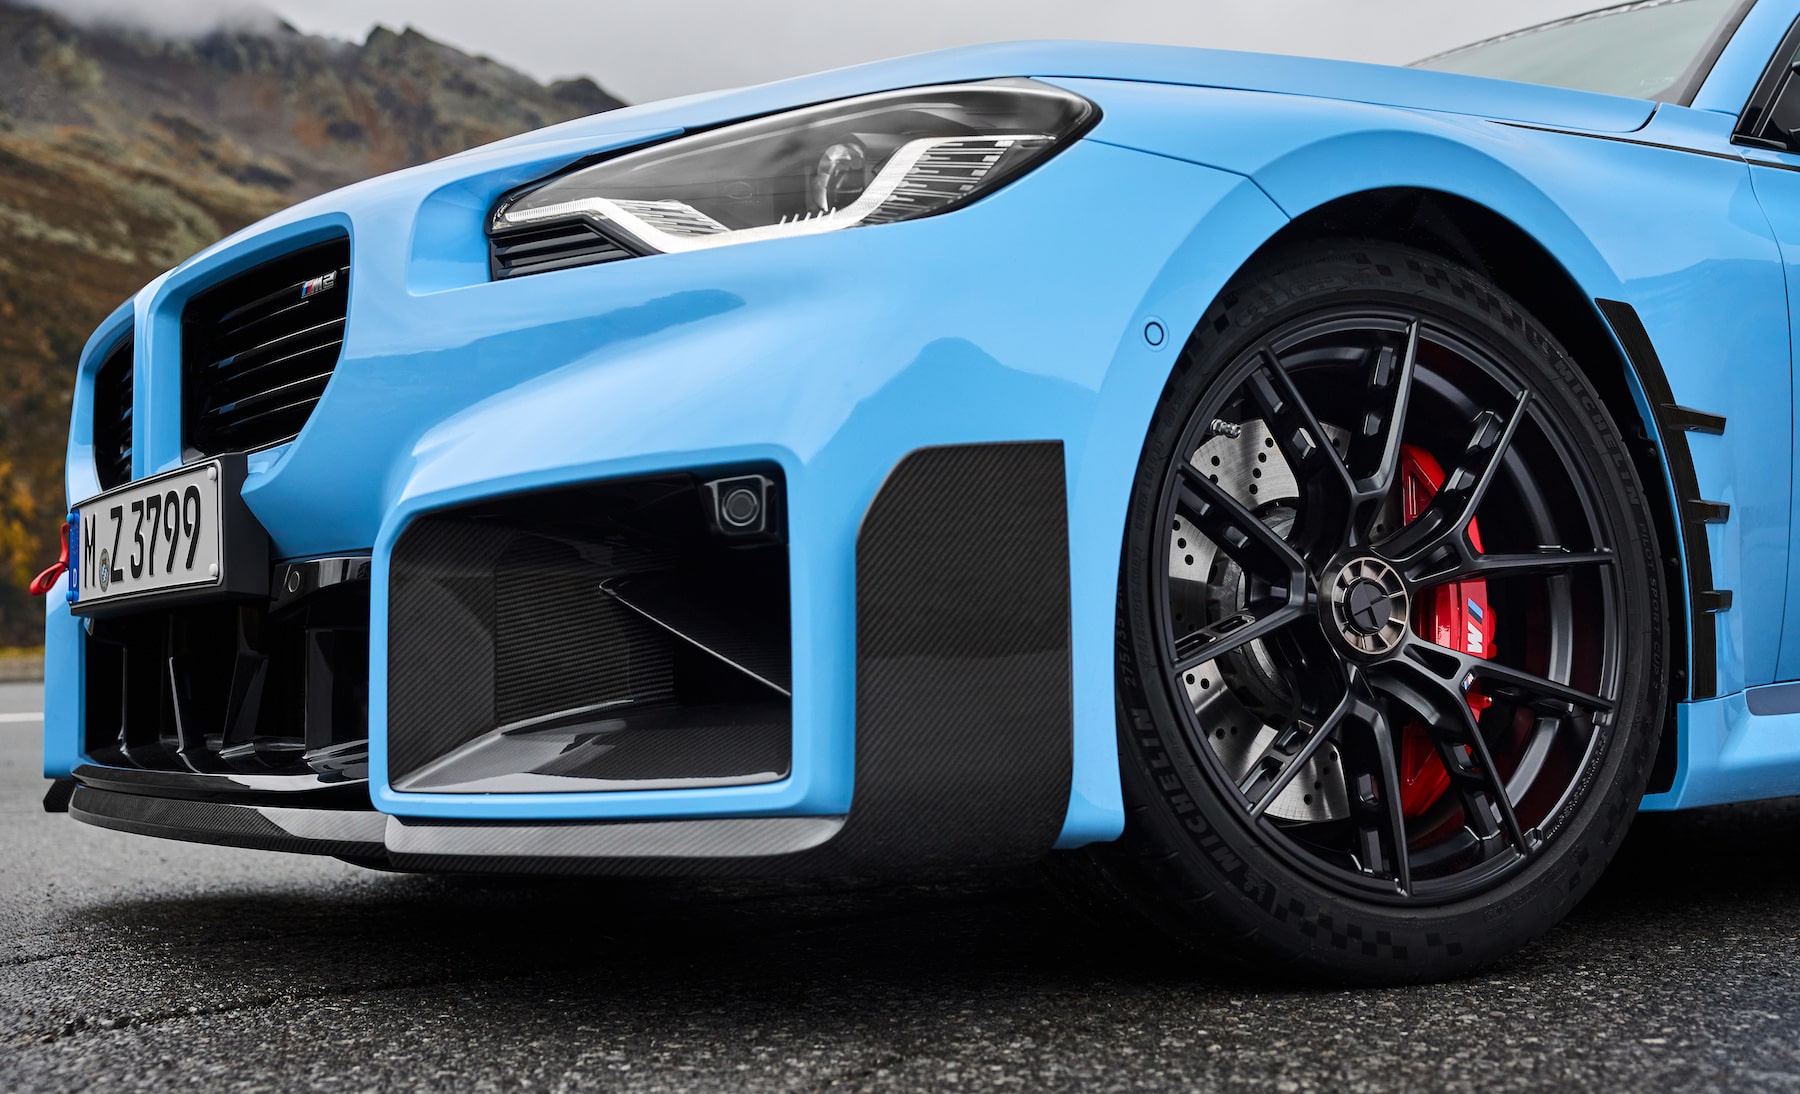 bmw adds 3.0 csl-inspired centrelock wheels to the m performance range